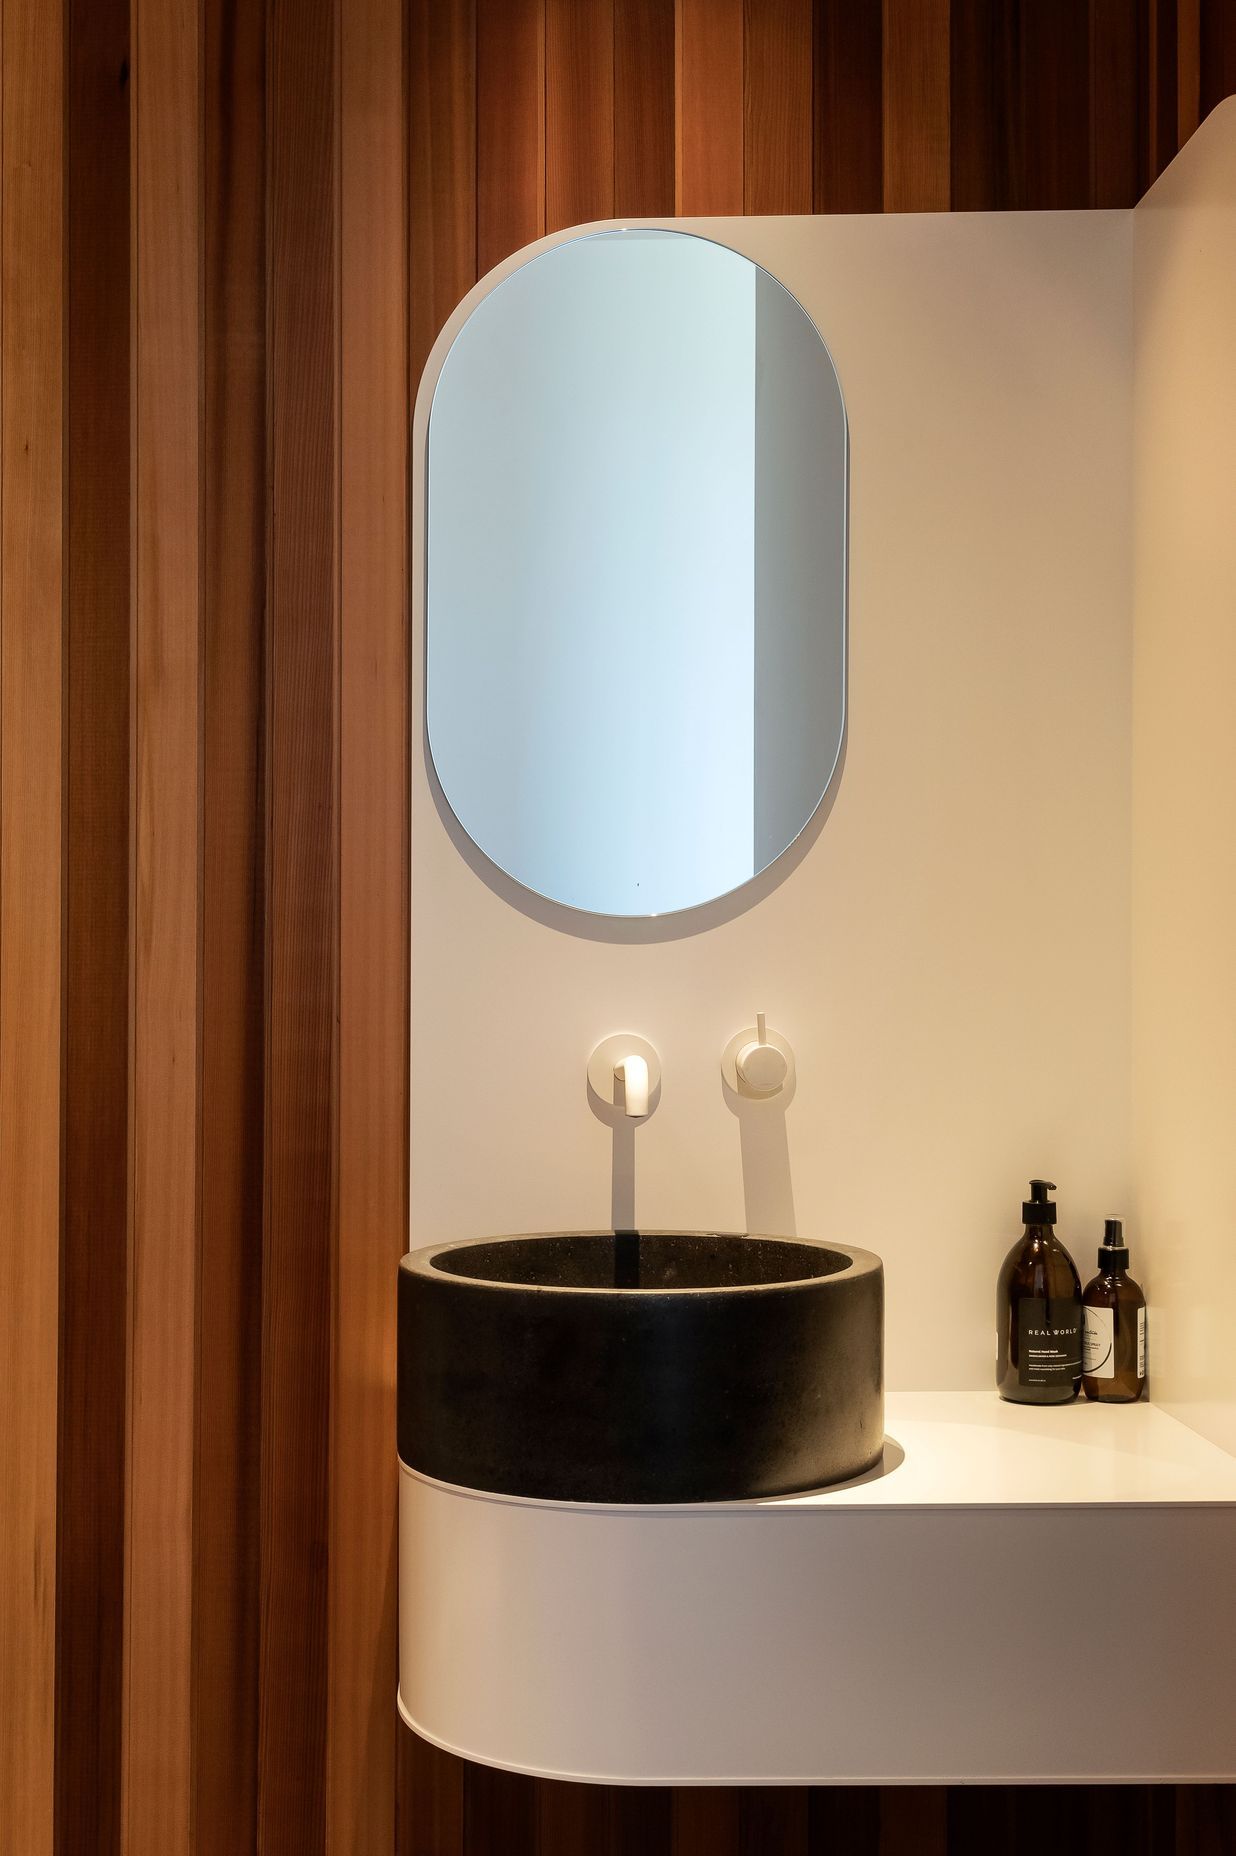 A curved powder room vanity provides the perfect foil for the timber wall lining.